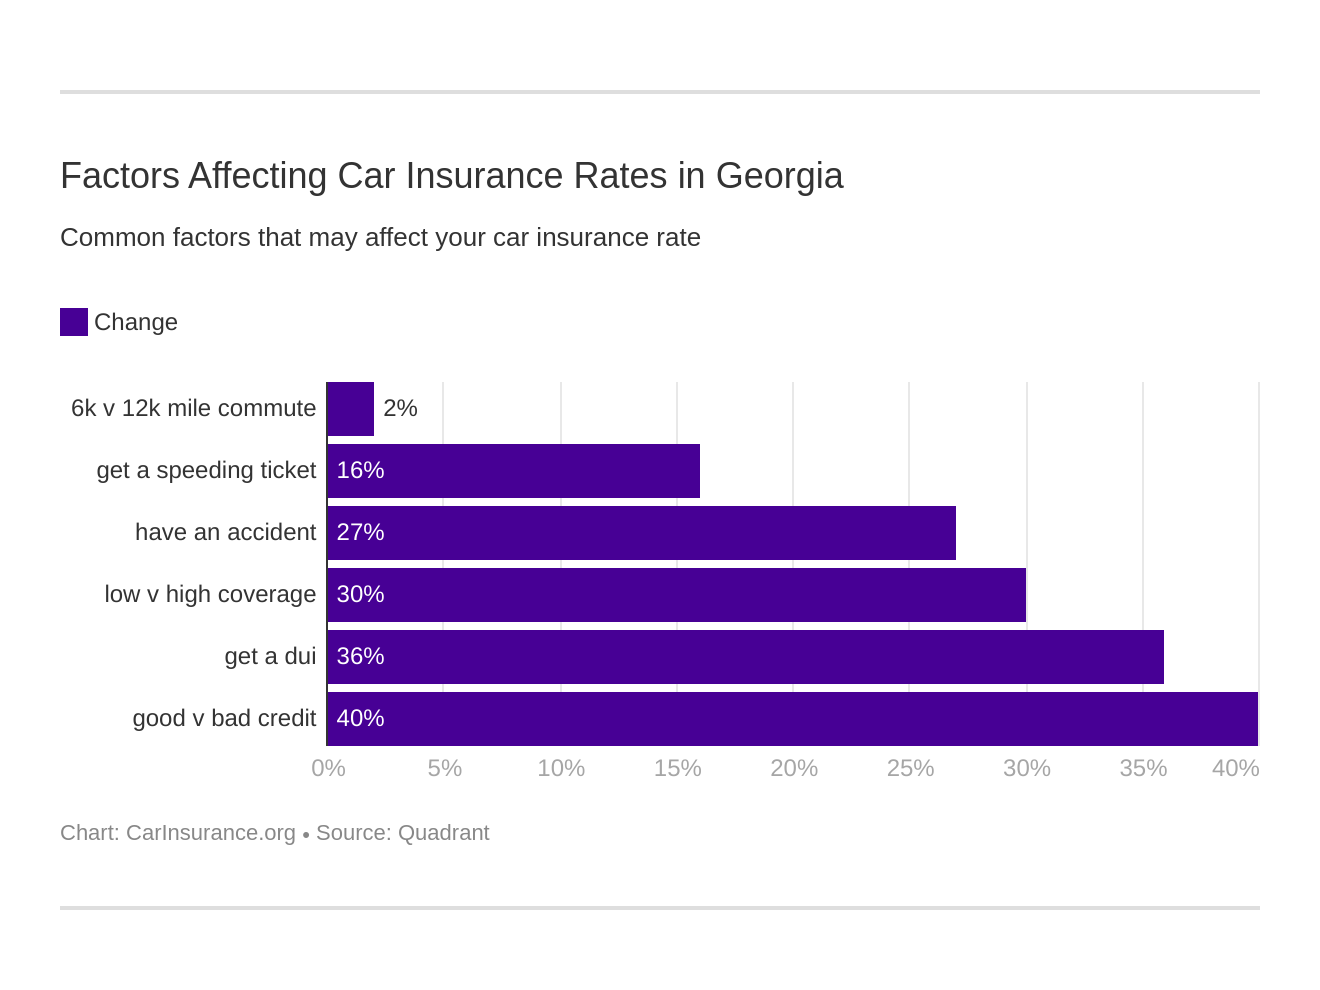 Unraveling: Why is Auto Insurance So Expensive in Georgia?